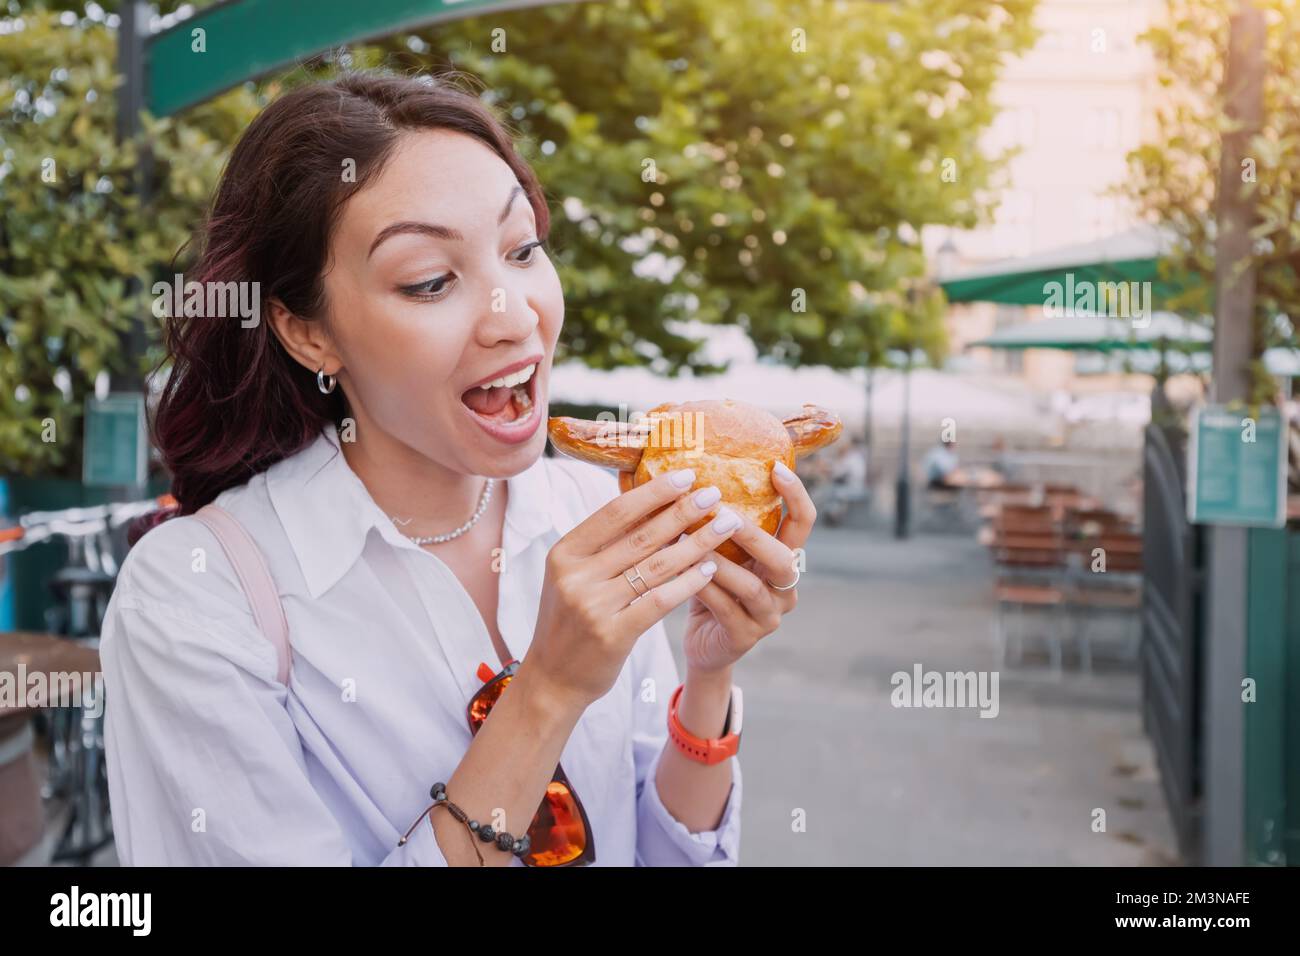 A happy girl eats an appetizing traditional German bratwurst hot dog with juicy sausage and seasonings Stock Photo